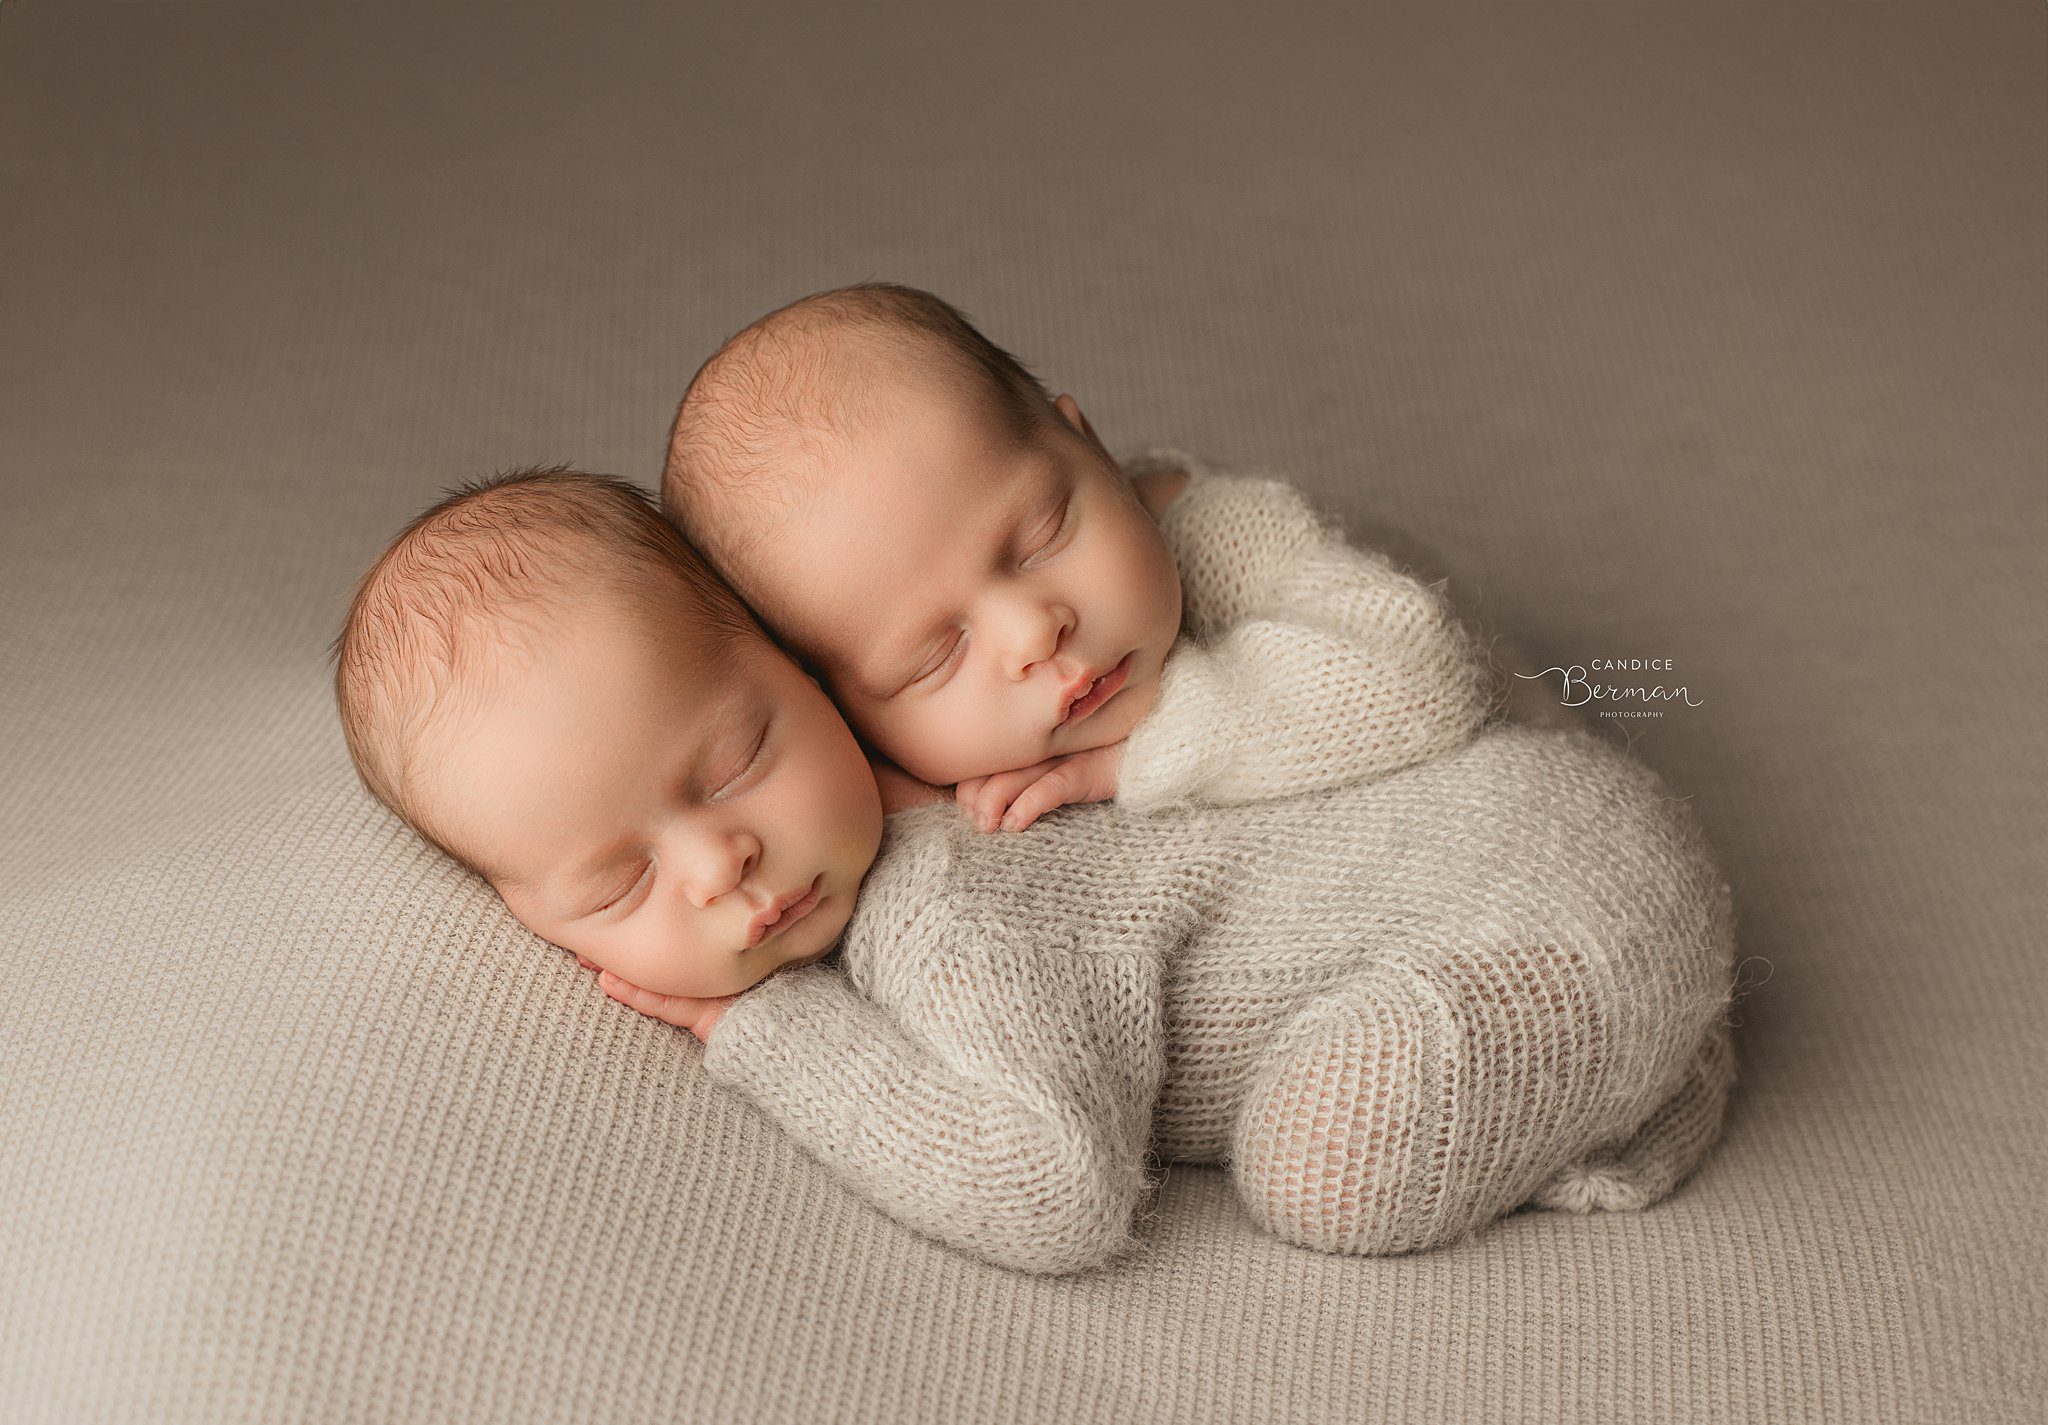 Sleeping newborn baby twins cuddle in knit onesies in a studio after meeting orange county pediatricians